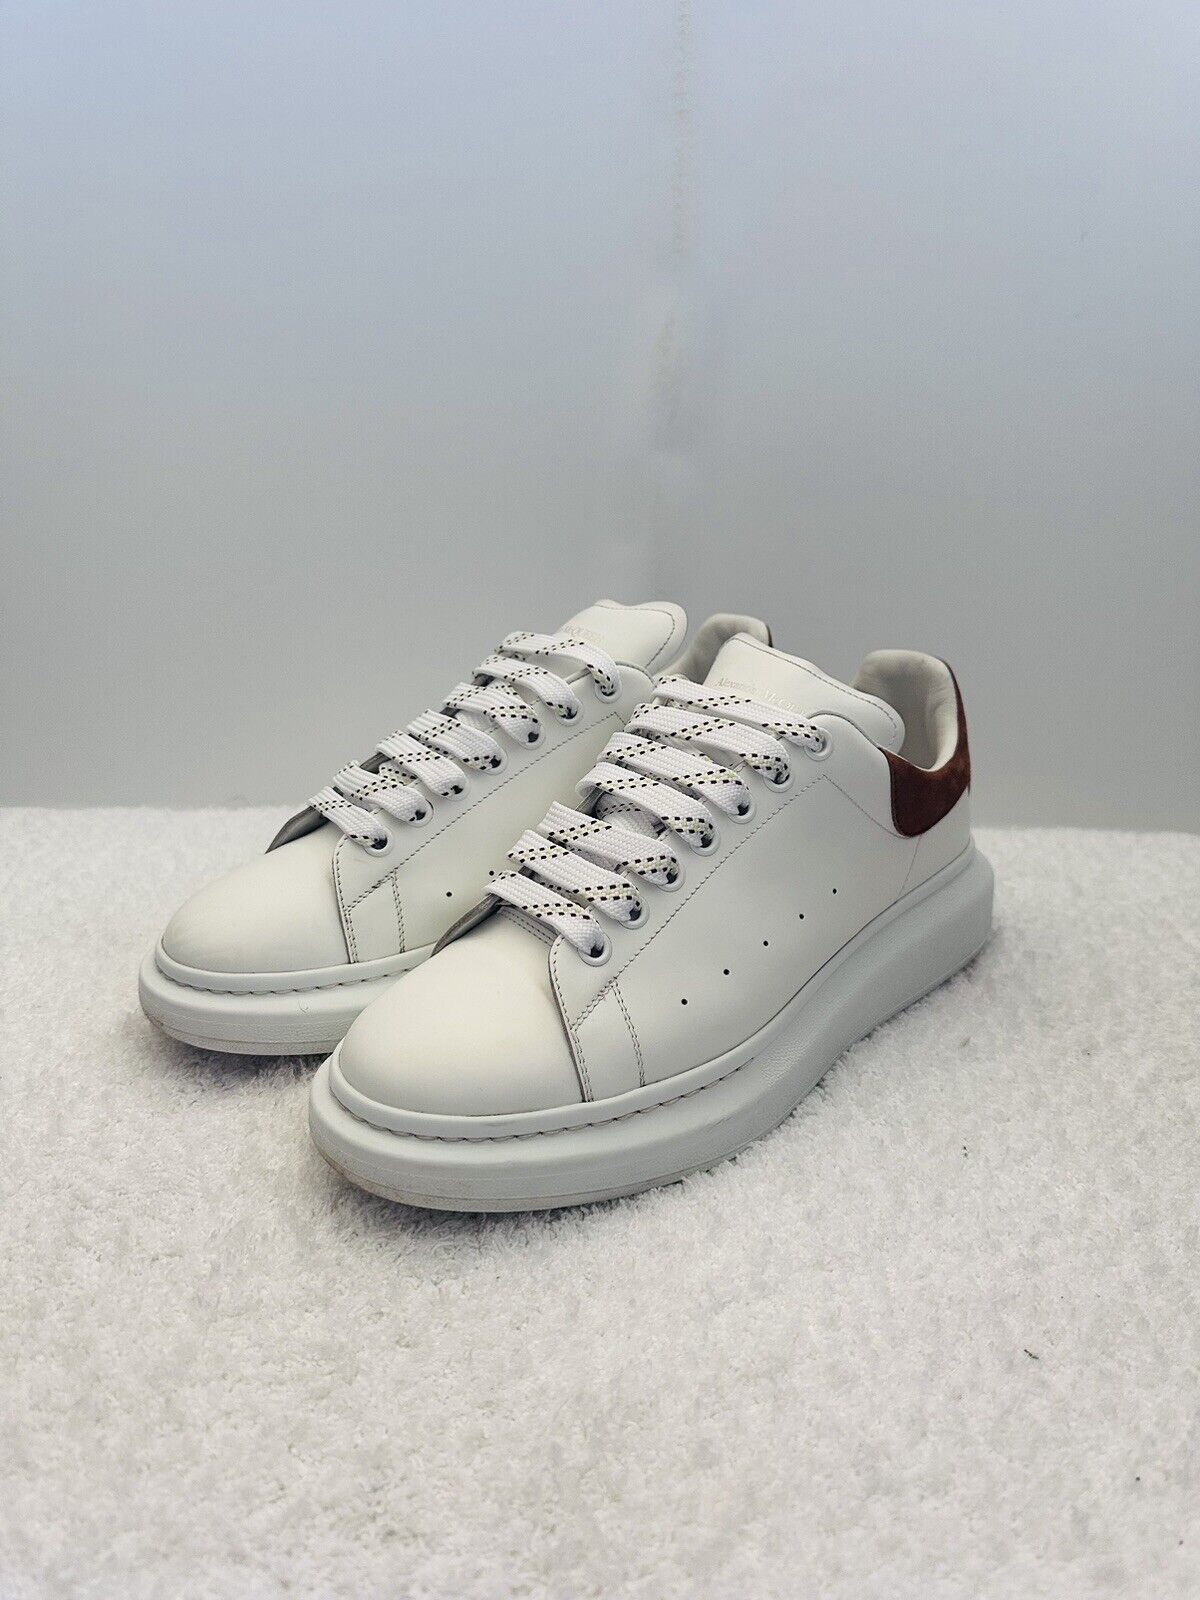 alexander mcqueen sneakers Size 45 men (US Size 12) With Box And Extra Laces